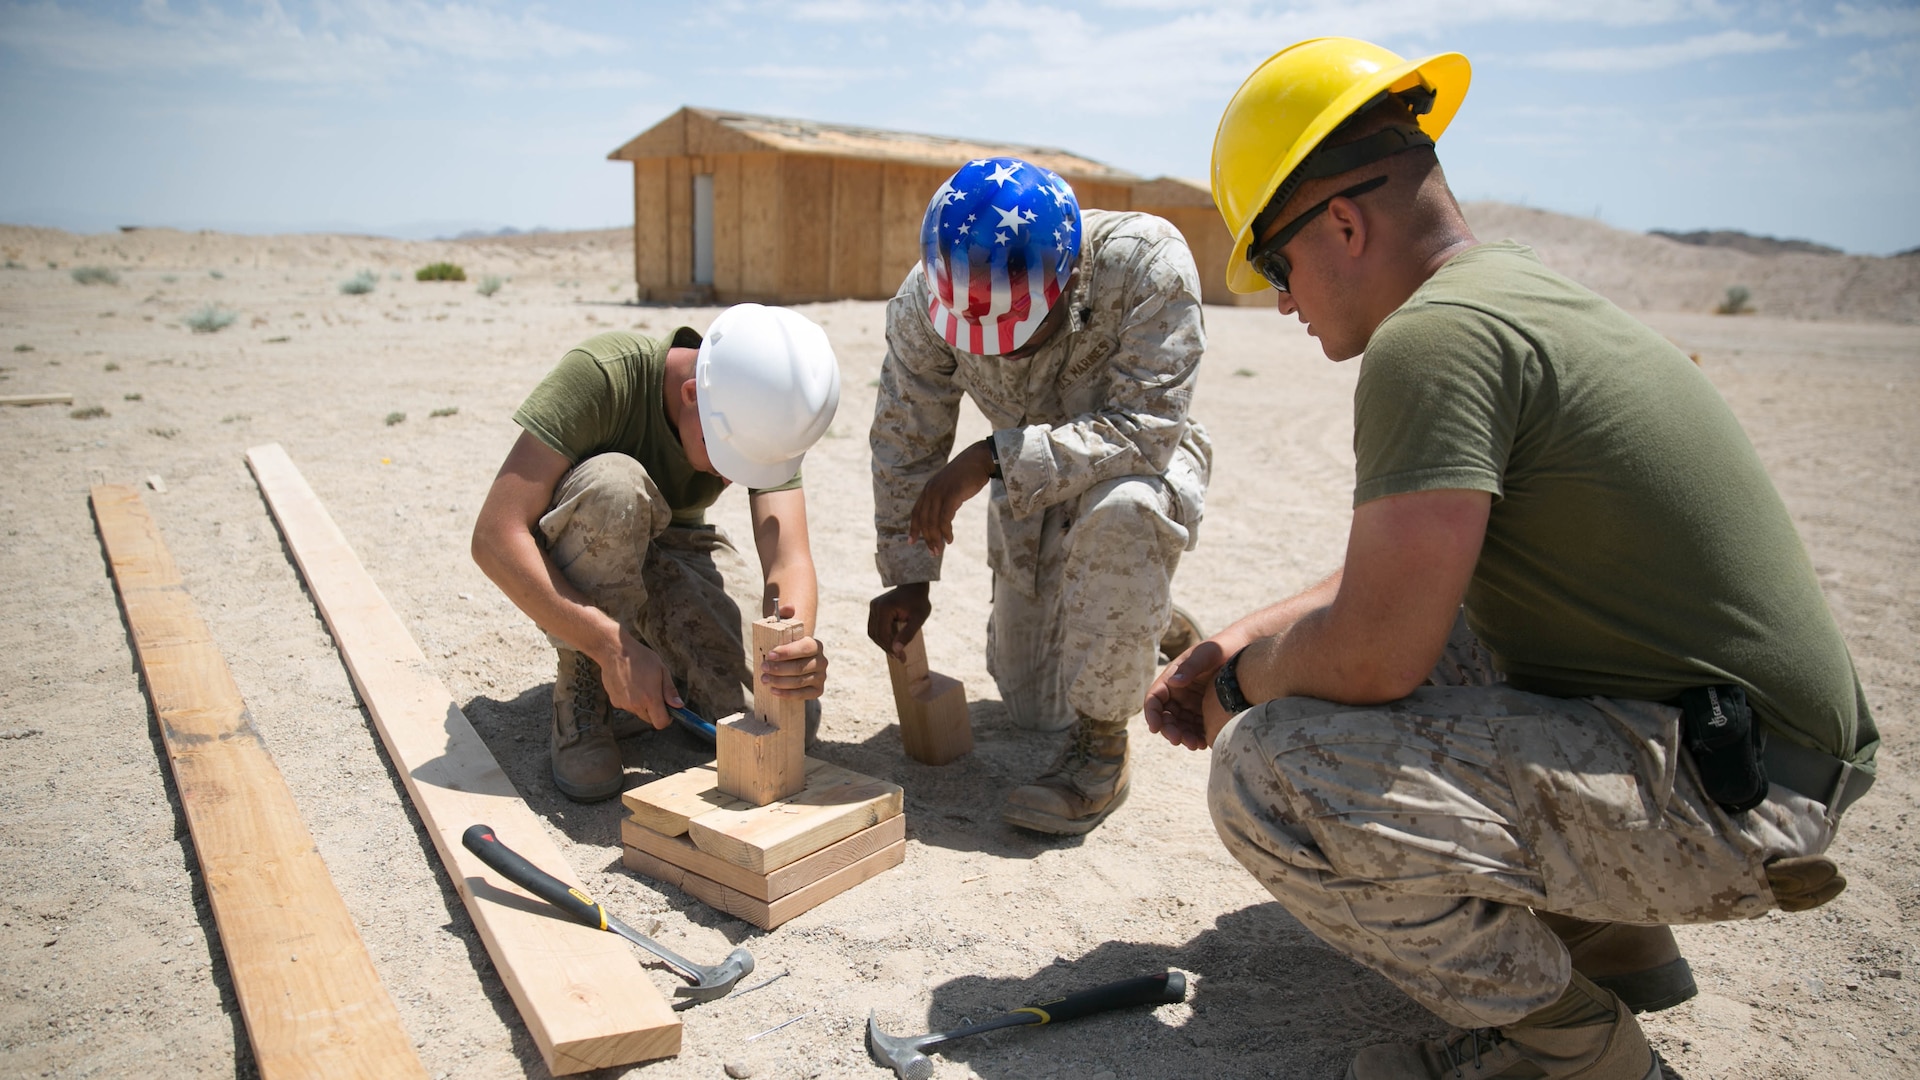 Marines with the engineer platoon for Marine Wing Support Squadron 272, construct a foundation for a Southwest Asia hut at the Combat Center during Integrated Training Exercise 5-17, July 29, 2017. MWSS-272 is supporting the Aviation Combat Element of the ITX. The ACE conducts offensive, defensive, and all other air operations to support the MAGTF mission .